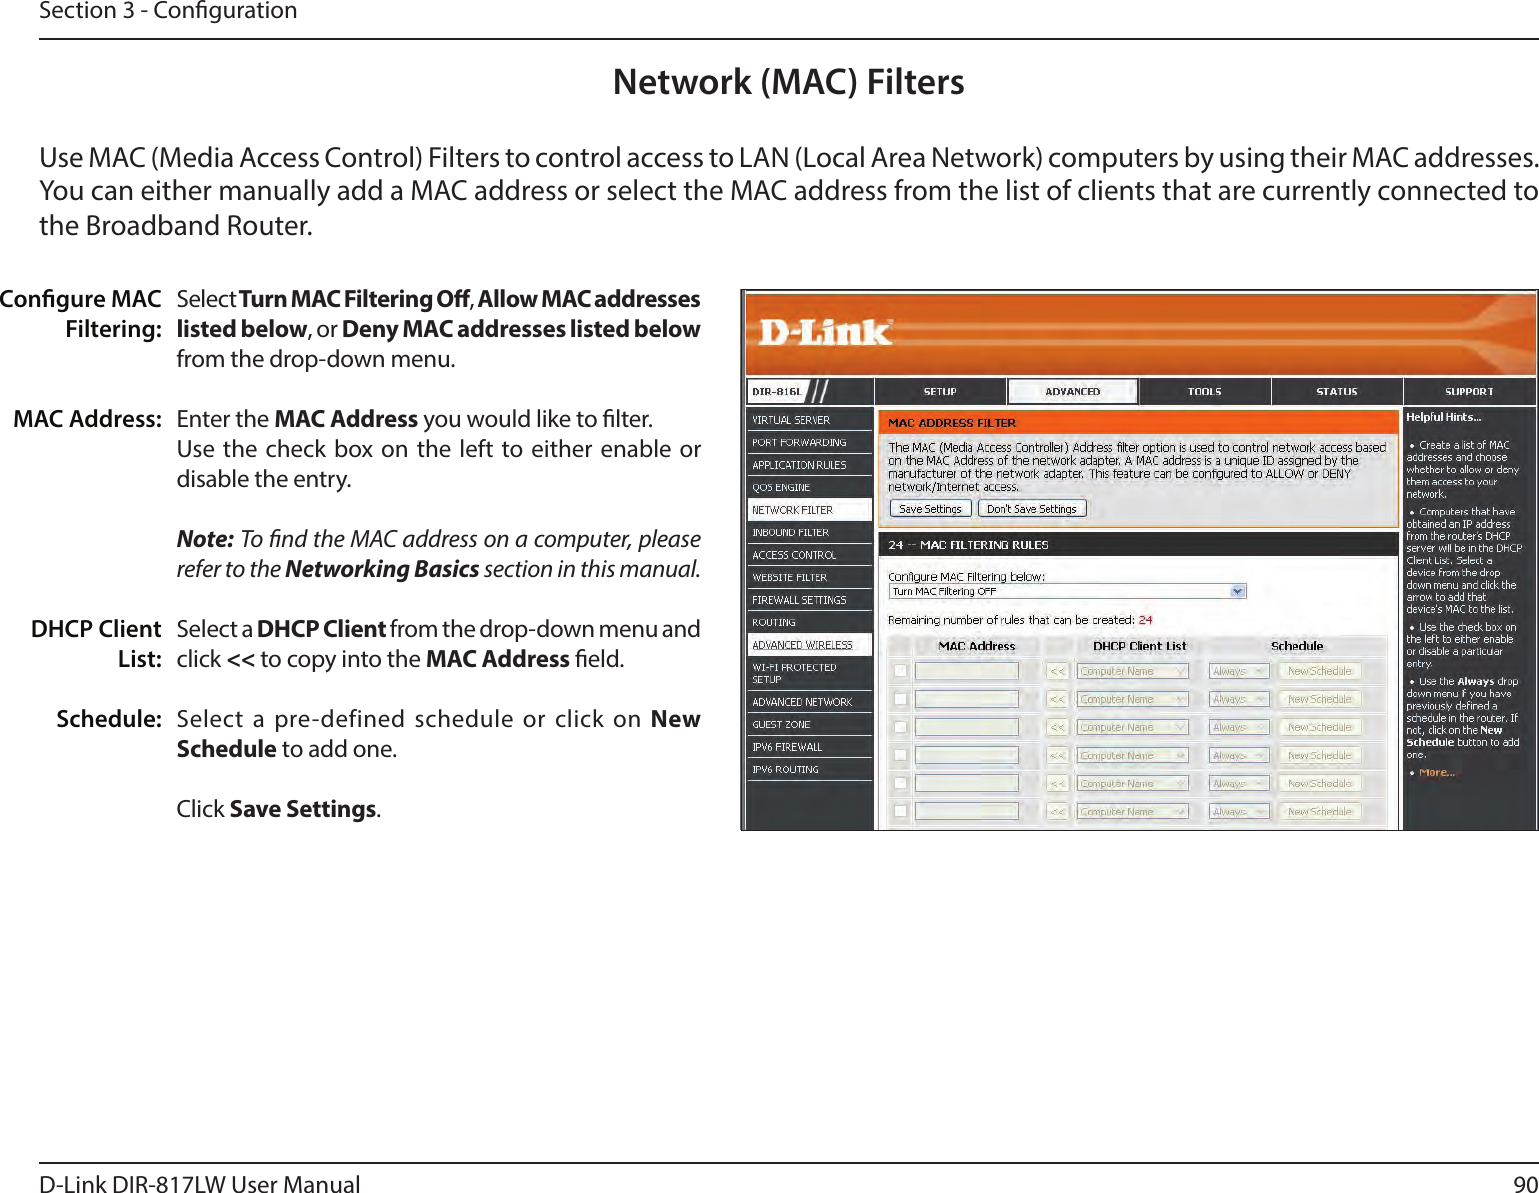 90D-Link DIR-817LW User ManualSection 3 - CongurationNetwork (MAC) FiltersSelect Turn MAC Filtering O, Allow MAC addresses listed below, or Deny MAC addresses listed below from the drop-down menu. Enter the MAC Address you would like to lter. Use the  check  box on  the  left to either enable or disable the entry.Note: To nd the MAC address on a computer, please refer to the Networking Basics section in this manual. Select a DHCP Client from the drop-down menu and click &lt;&lt; to copy into the MAC Address eld.Select  a  pre-defined  schedule  or  click  on New Schedule to add one.Click Save Settings.Congure MAC Filtering:MAC Address:DHCP Client List:Schedule:Use MAC (Media Access Control) Filters to control access to LAN (Local Area Network) computers by using their MAC addresses. You can either manually add a MAC address or select the MAC address from the list of clients that are currently connected to the Broadband Router.